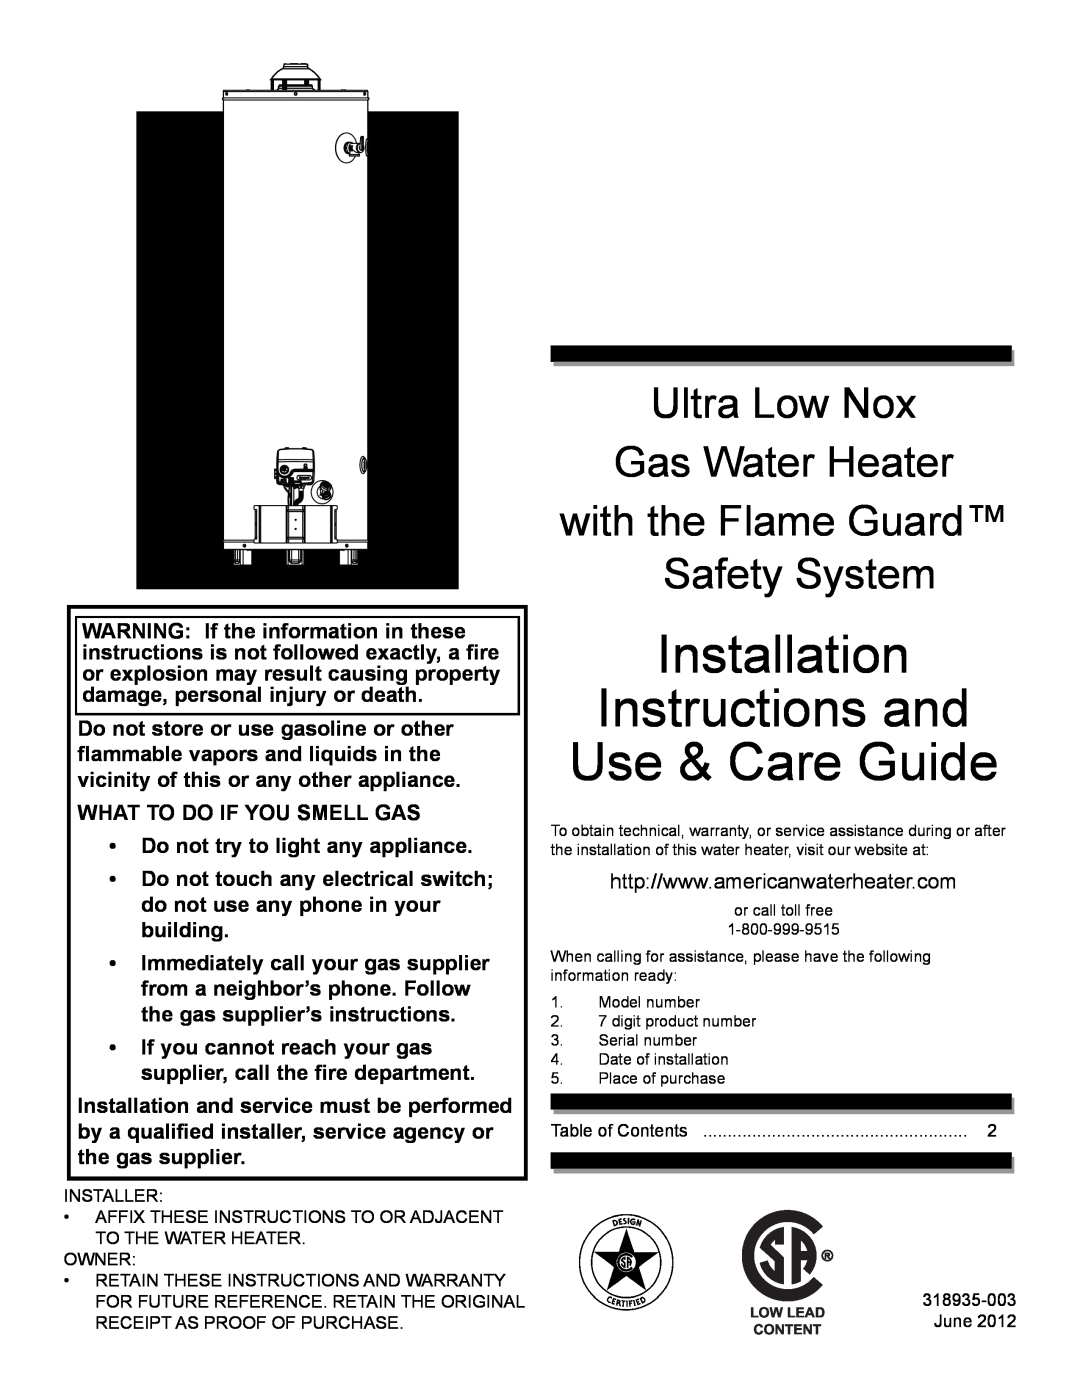 American Water Heater 318935-003 installation instructions WHAT TO DO IF YOU SMELL GAS Do not try to light any appliance 